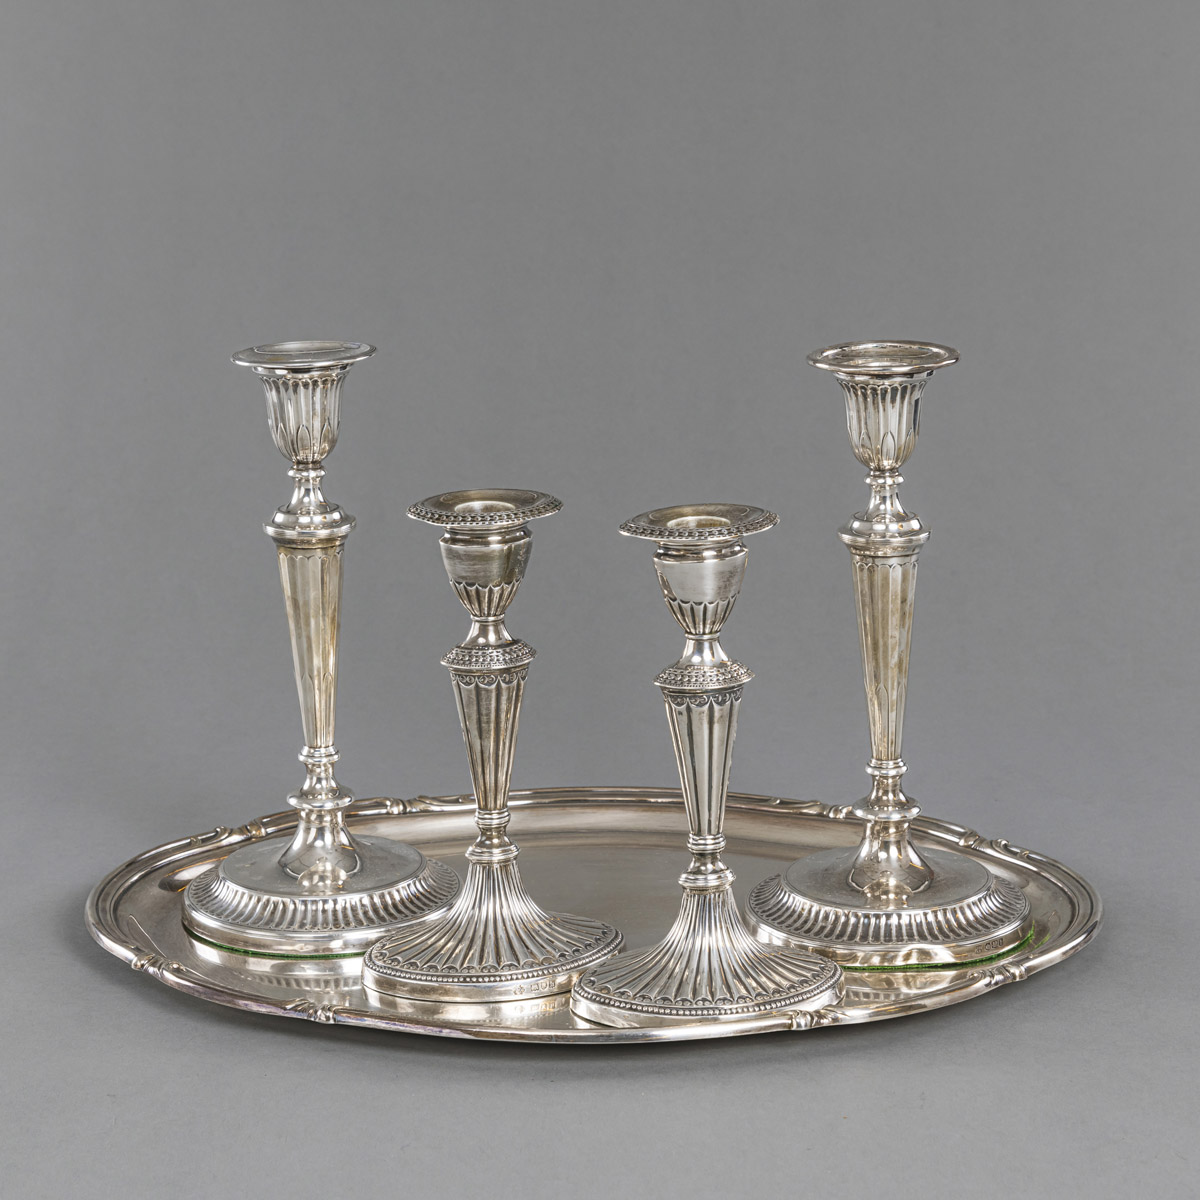 TWO PAIR OF LONDON SILVER CANDLESTICKS AND A GERMAN TRAY